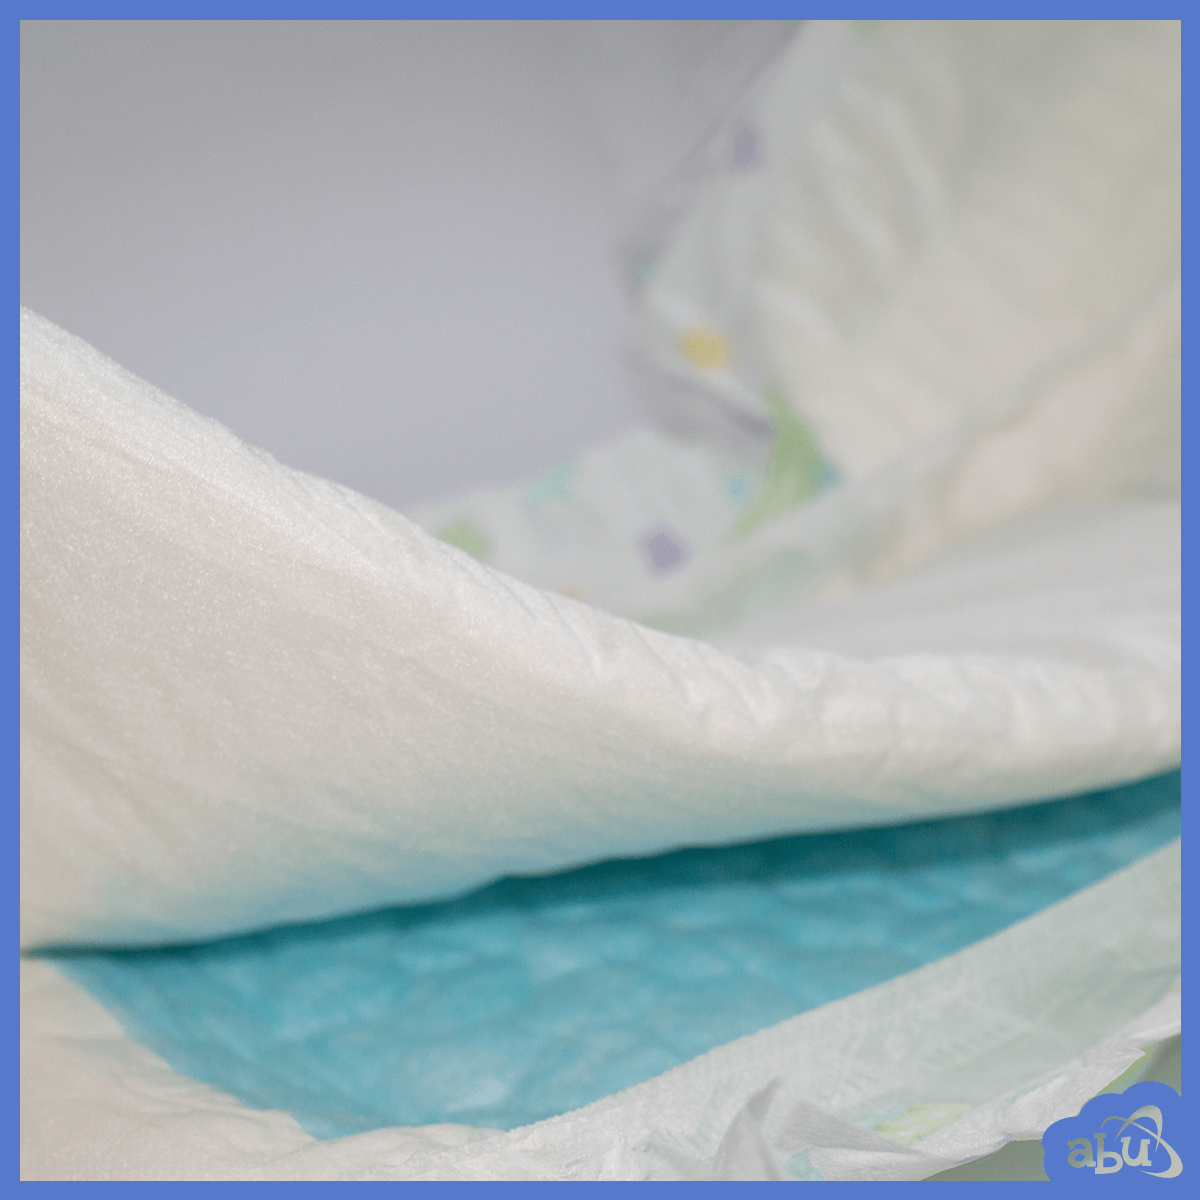 Fluffy diapers and a thick Power-Up European-style booster. 🌧️ Is there a more iconic duo? Get 20% off a pack of either Power-Up style when purchasing 40+ diapers! Abuniverse.com #abdl #diaperlover #kink #abuniverse #babyfur #littlespace #ageplayer #ageplay